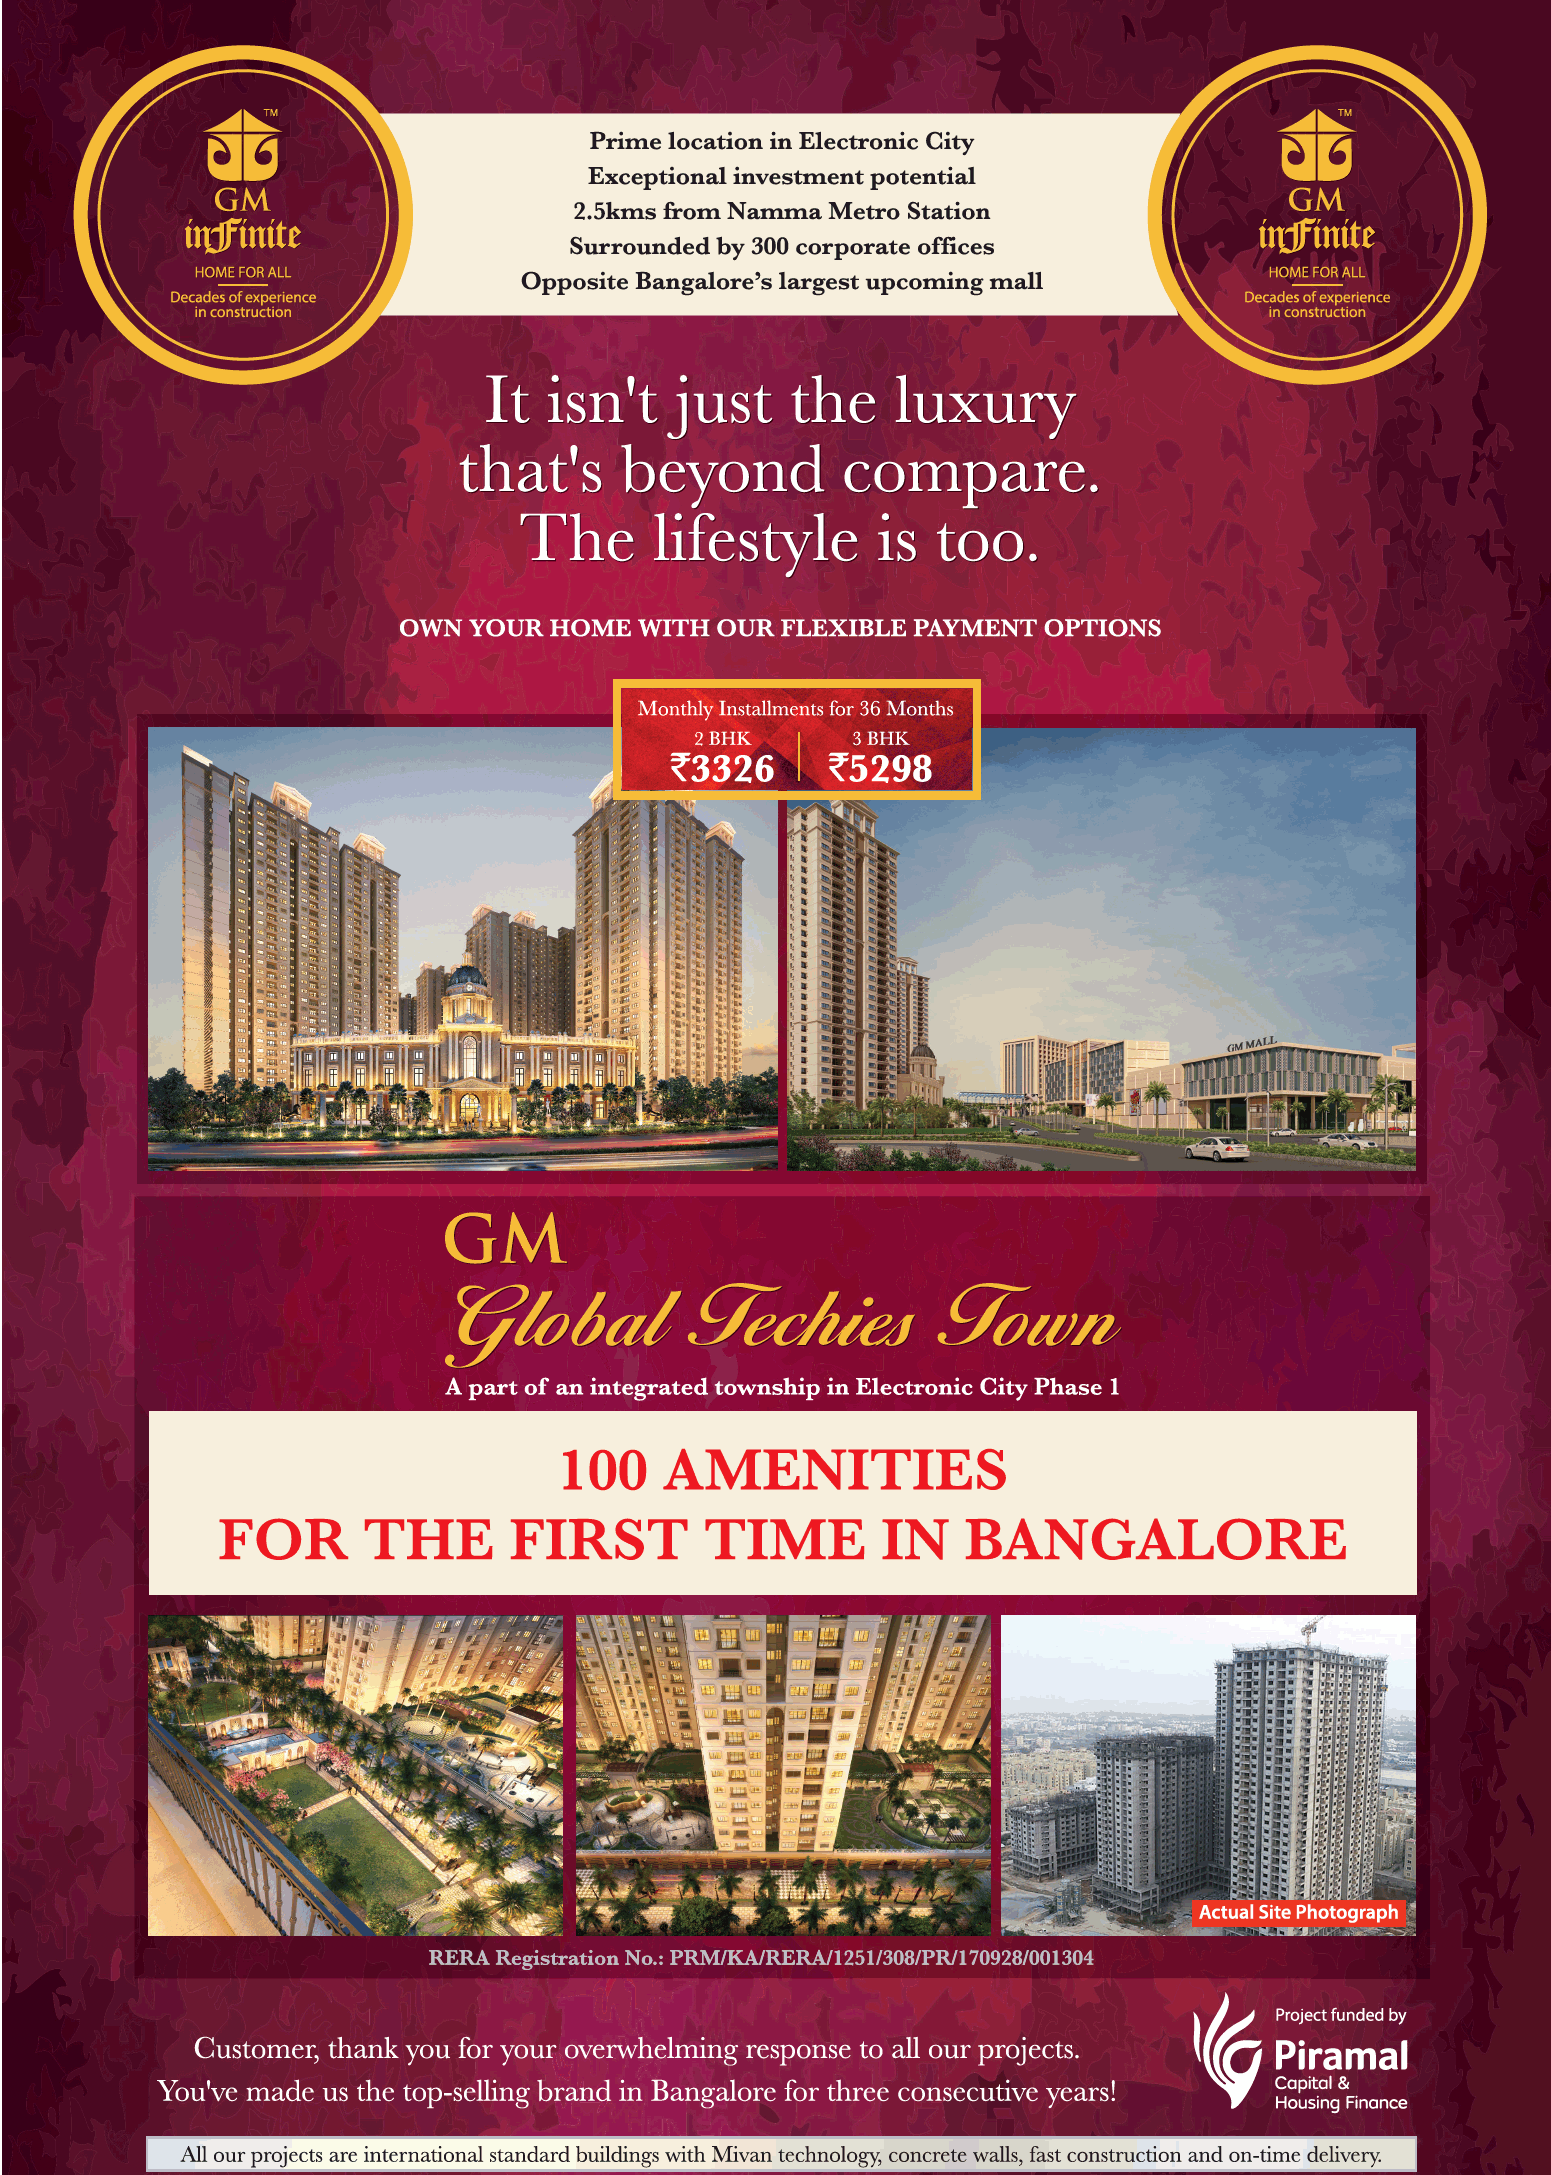 Own your home with flexible payment options at GM Global Techies Town in Bangalore Update